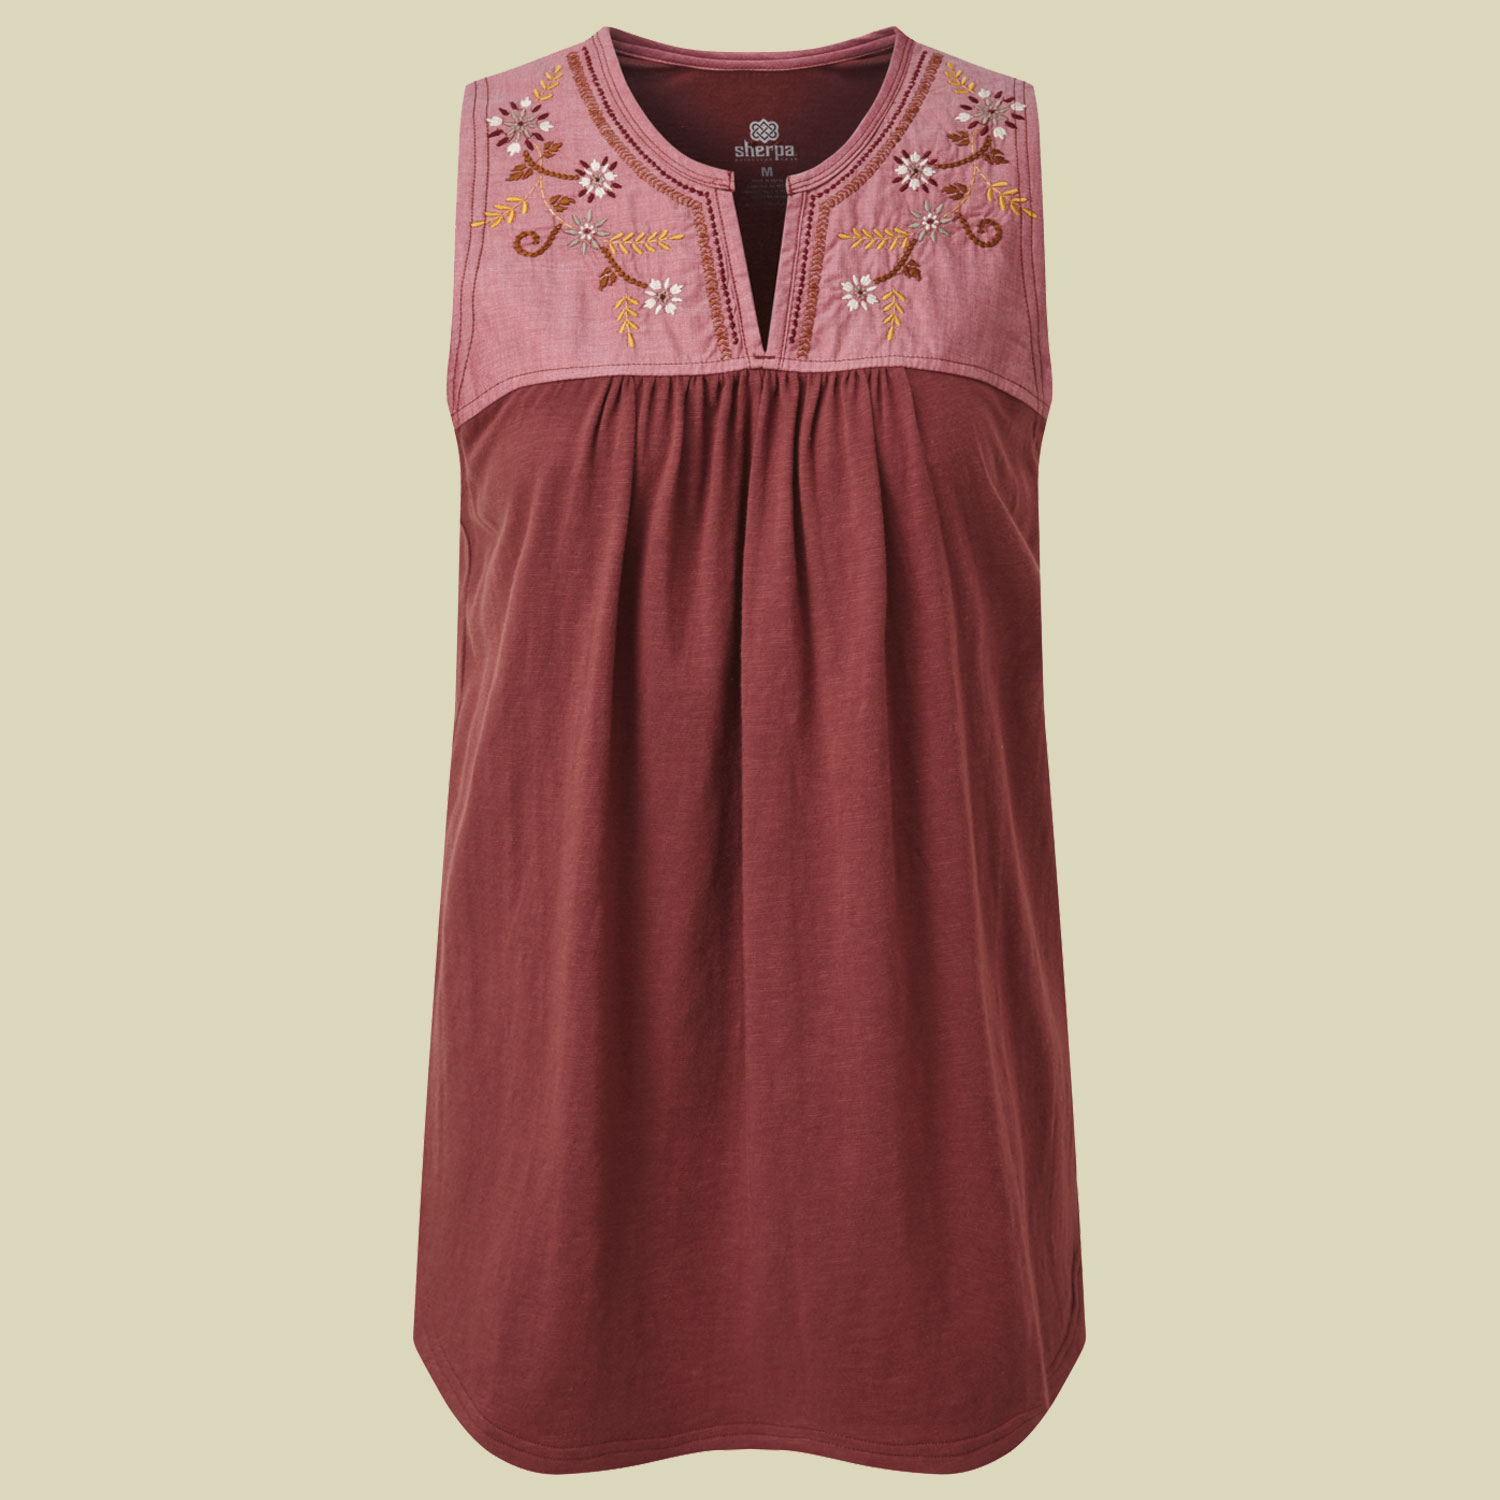 Shaanti Embroidery Top Women